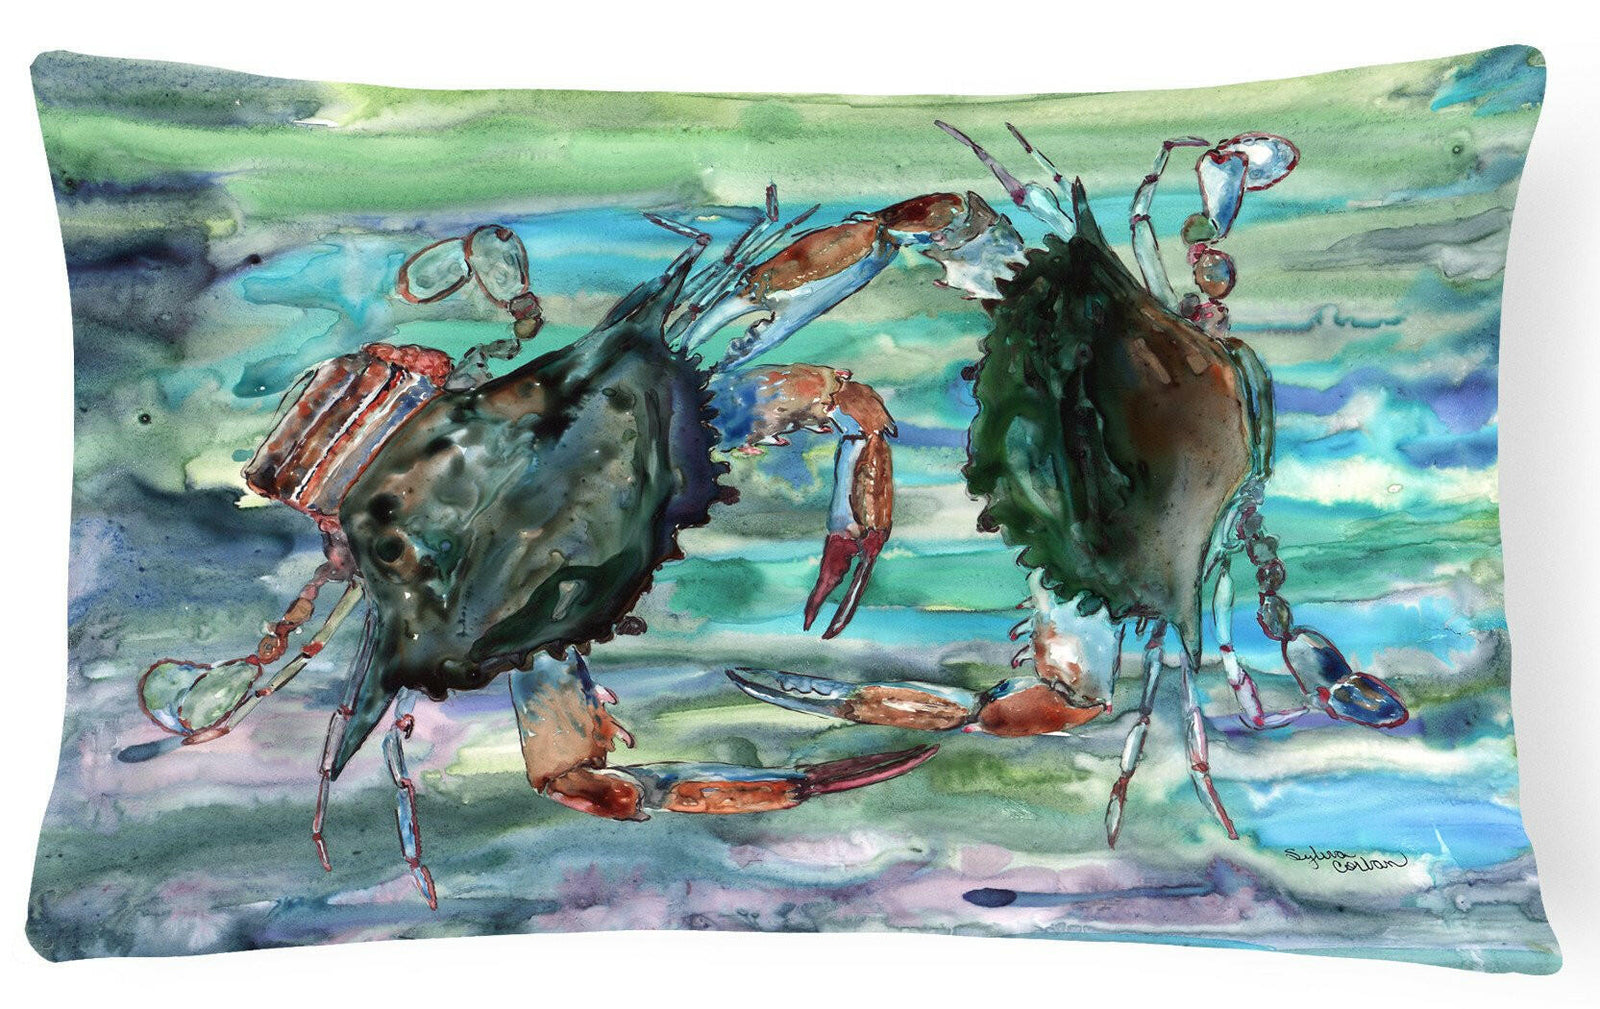 Watery Teal and Purple Crabs Canvas Fabric Decorative Pillow 8954PW1216 by Caroline's Treasures